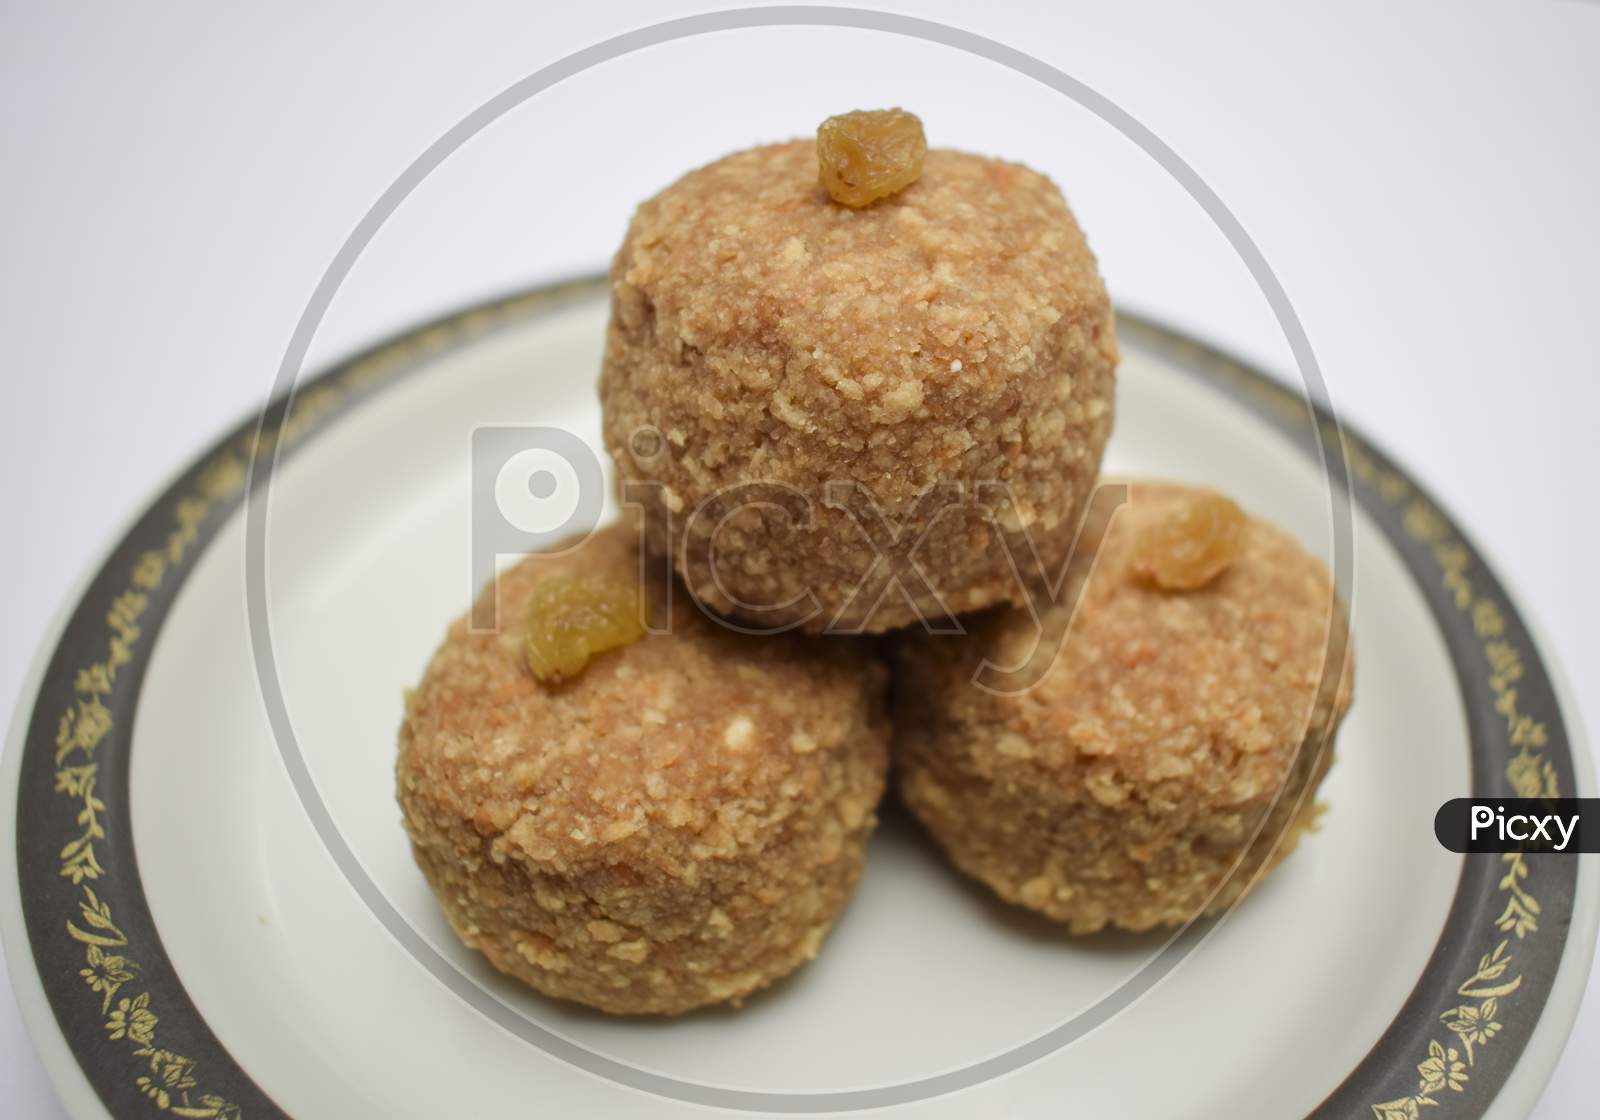 Closeup Of Popular Indian Sweet Balls Laddu Or Ladoo Made From Chapati Roti Powdered Mashed And Made In To Big Ball. Decorated With Raisin Kismis Served In Plate. Prashad For Festivals